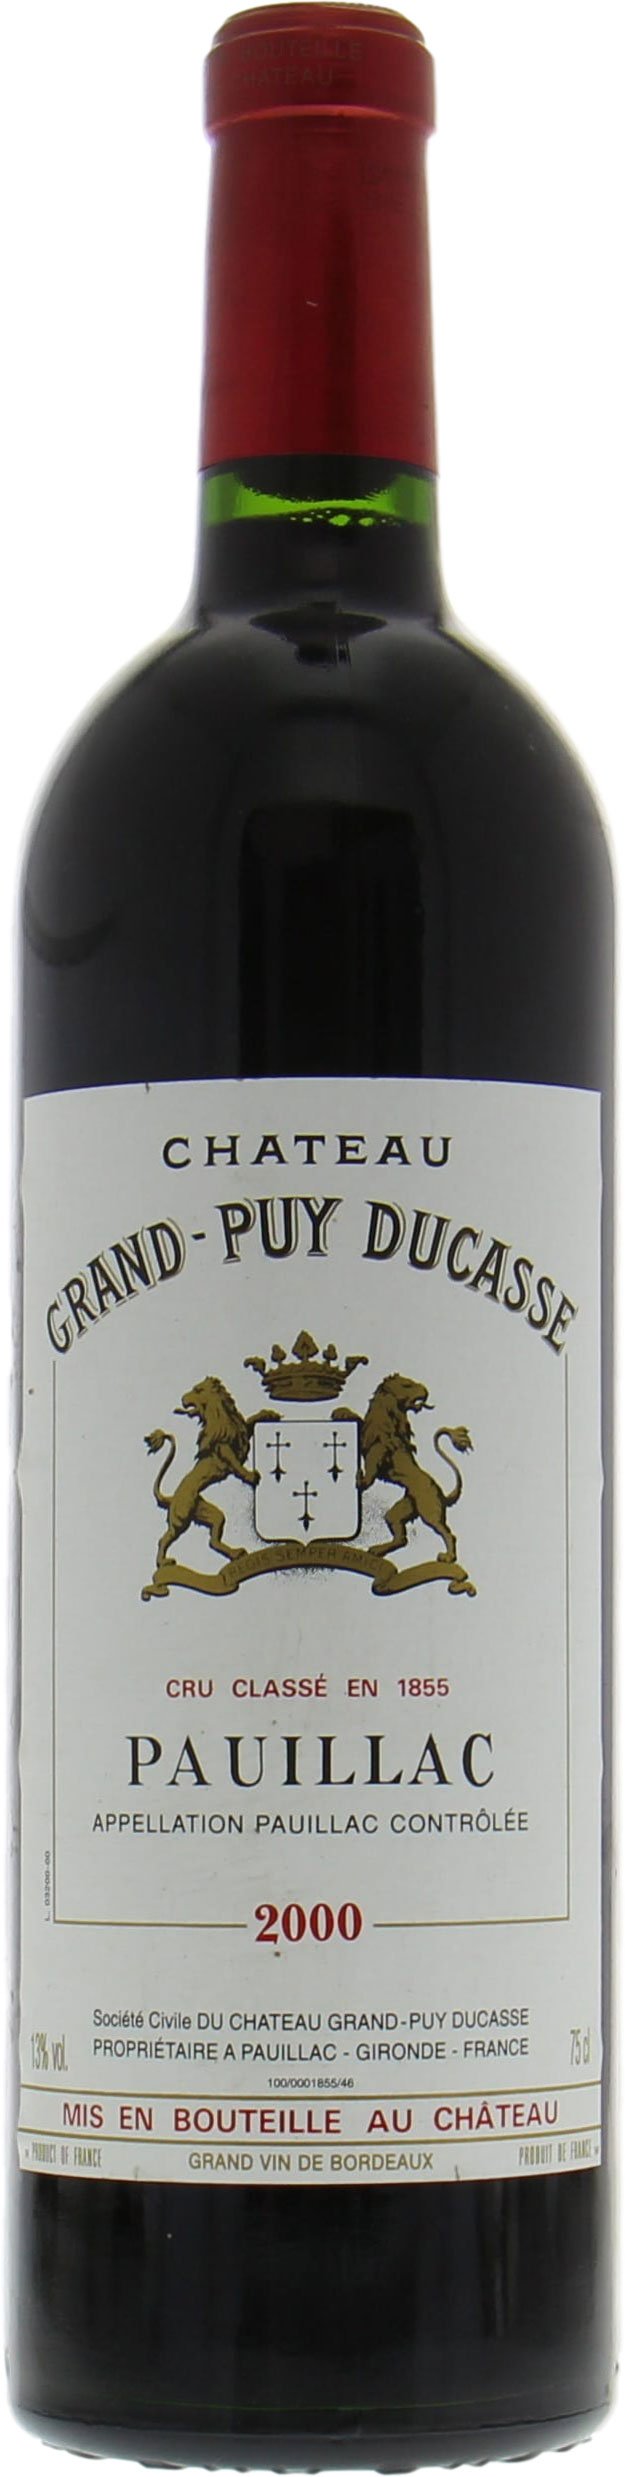 Chateau Grand Puy Ducasse - Chateau Grand Puy Ducasse 2000 Perfect